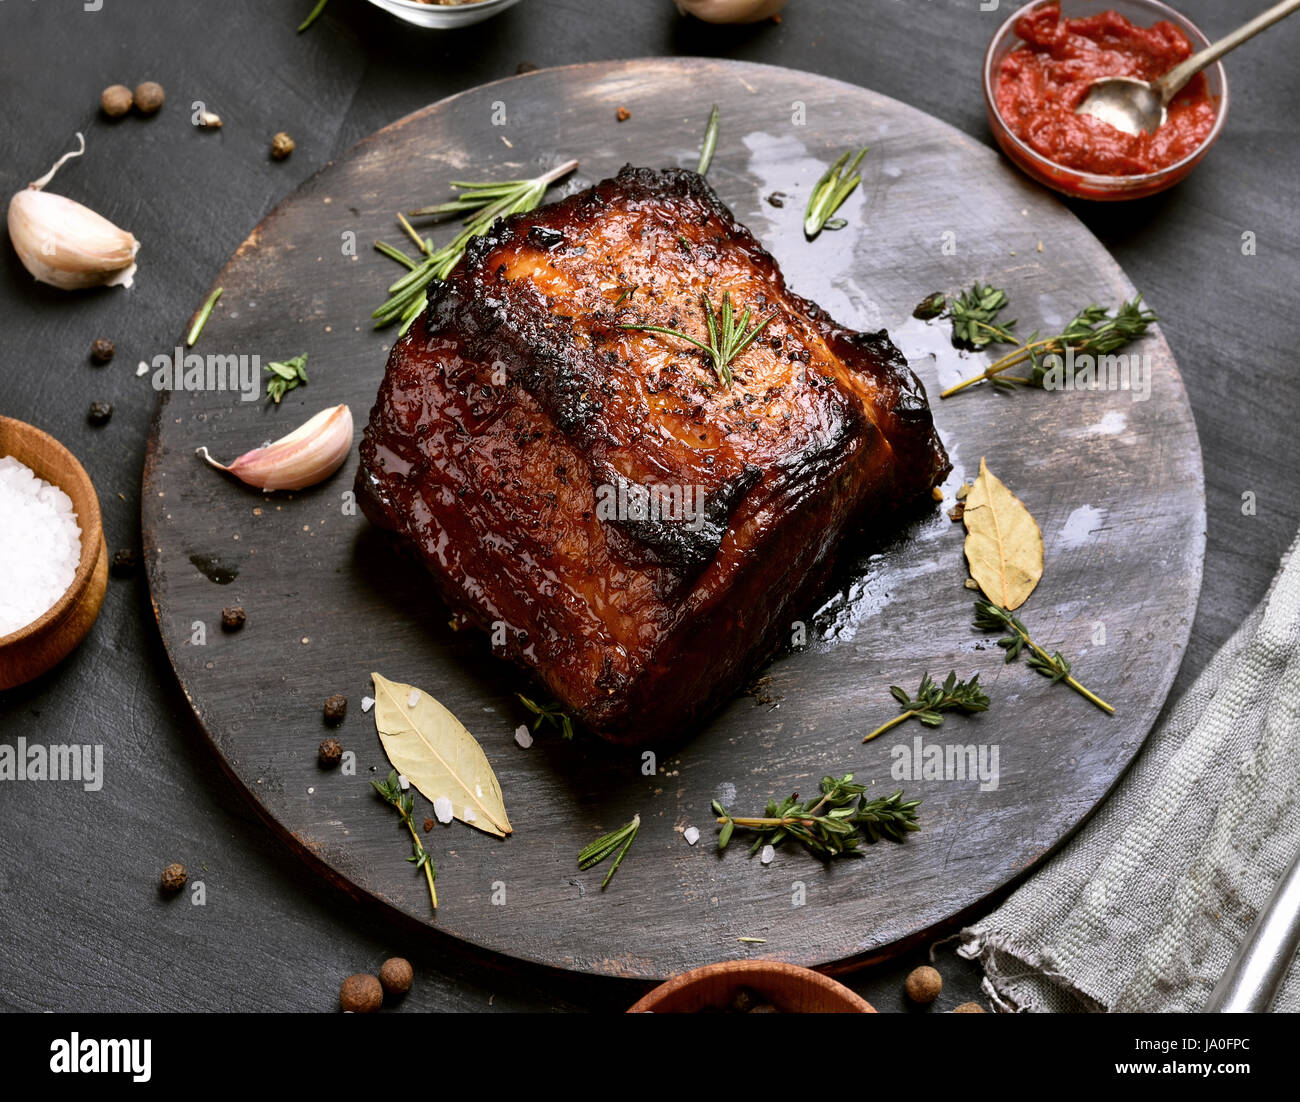 Bbq pork, grilled meat on wooden board Stock Photo